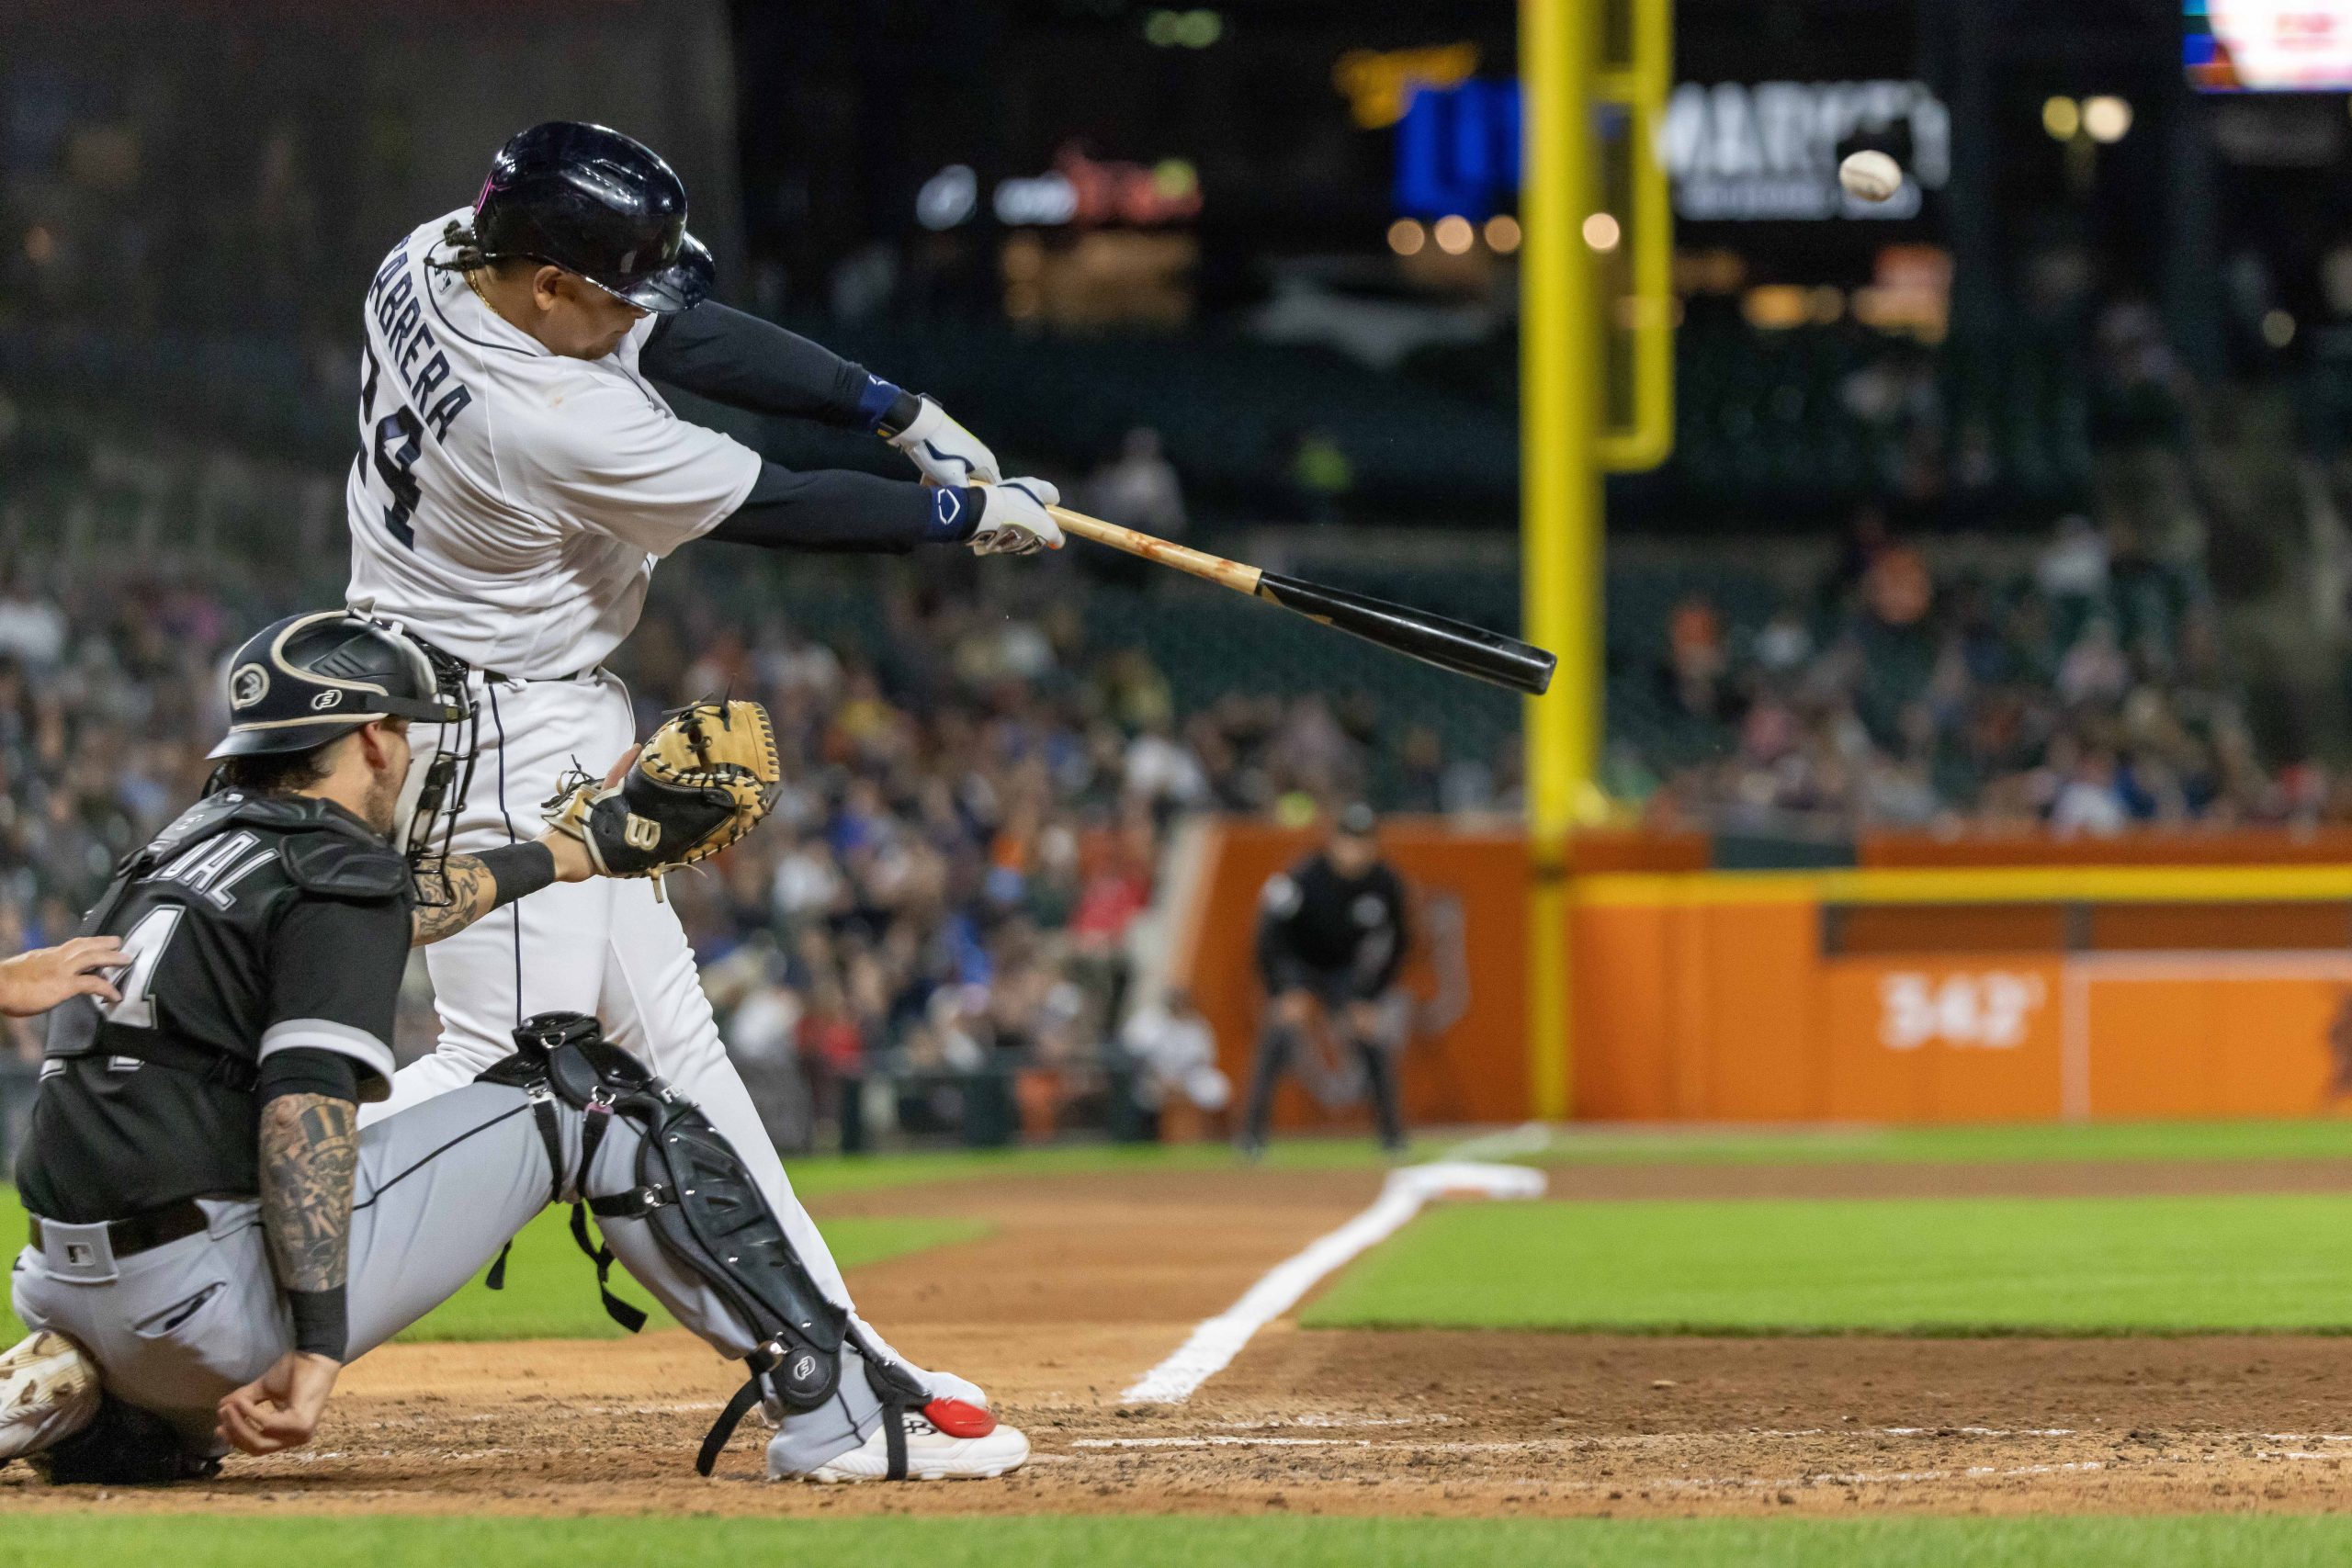 Today, Miguel Cabrera Miggy plays - Milwaukee Brewers